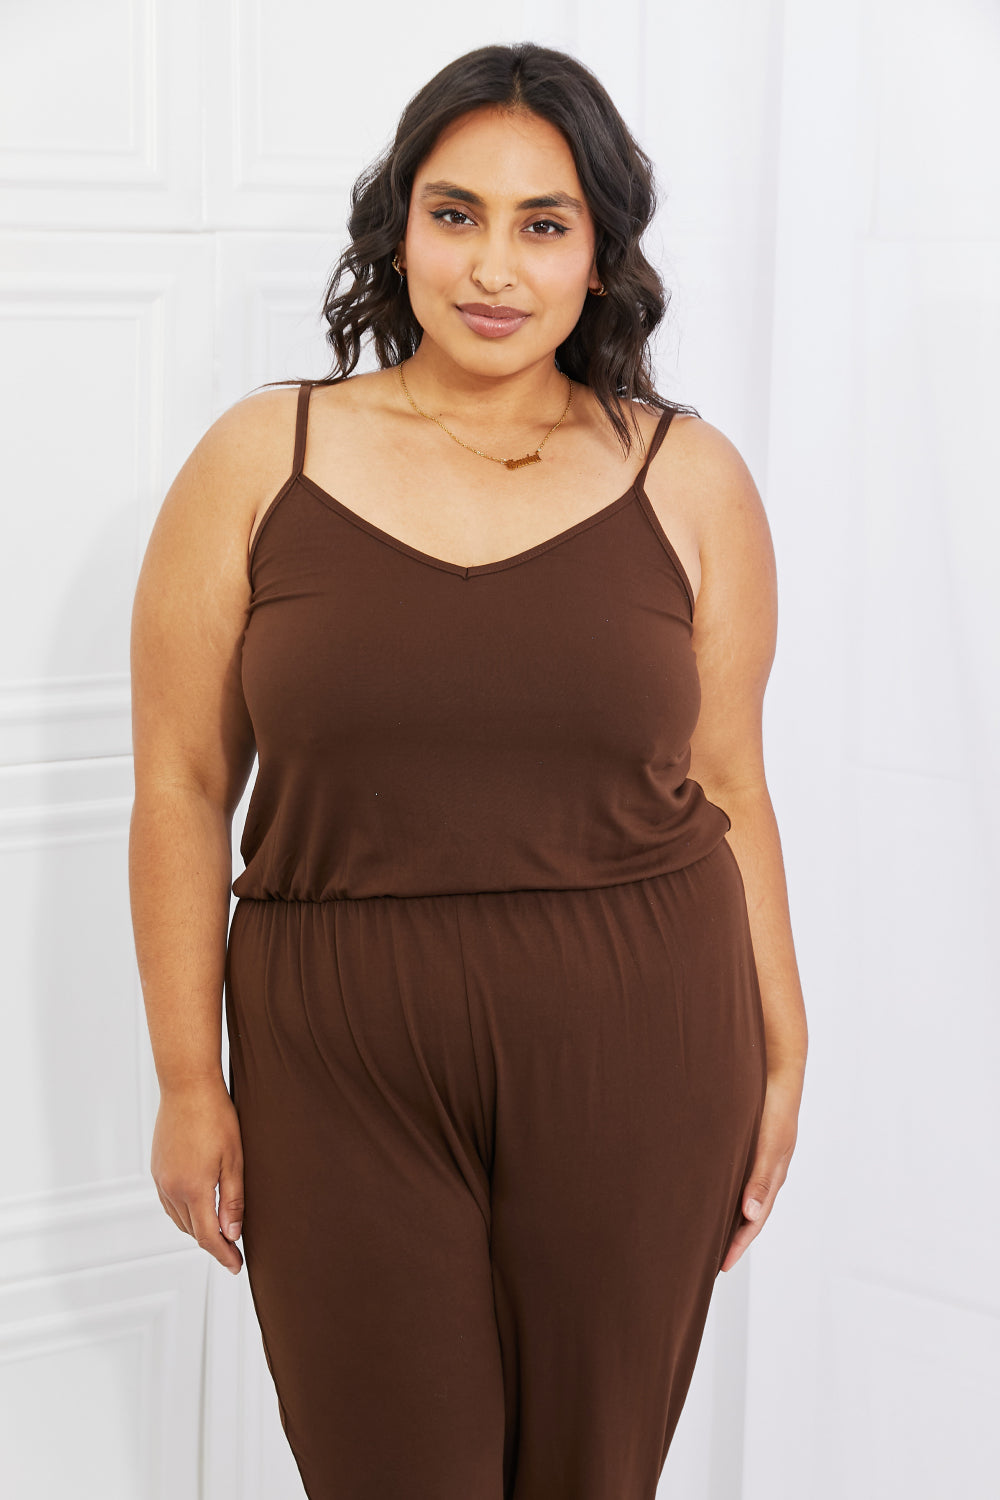 Capella Comfy Casual Plus Size Solid Elastic Waistband Jumpsuit in Chocolate Sunset and Swim   